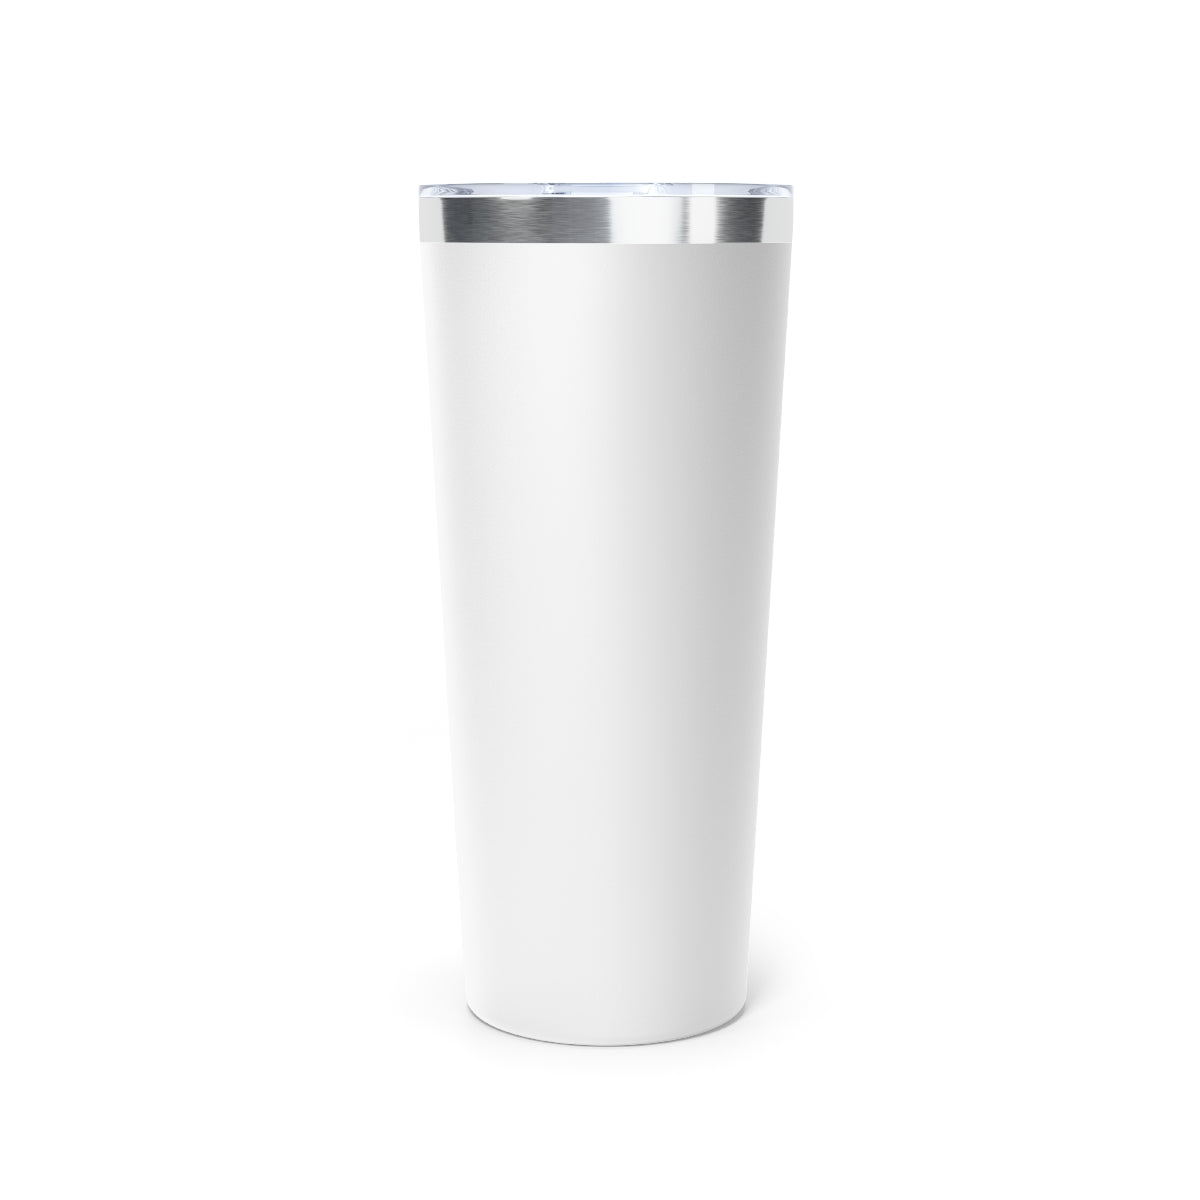 Mary Magdalene Copper Vacuum Insulated Tumbler